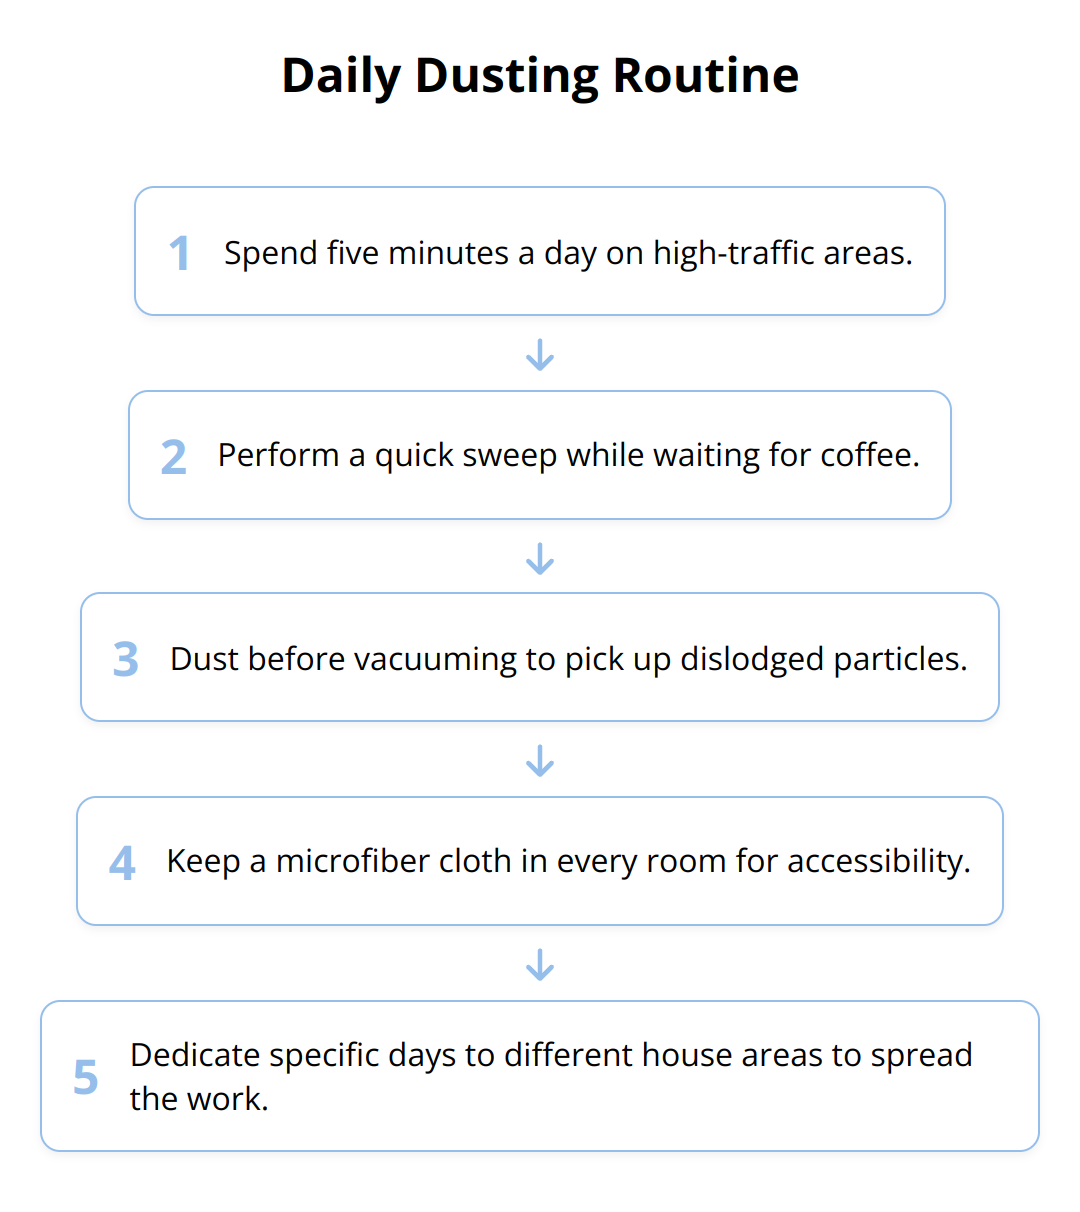 Flow Chart - Daily Dusting Routine